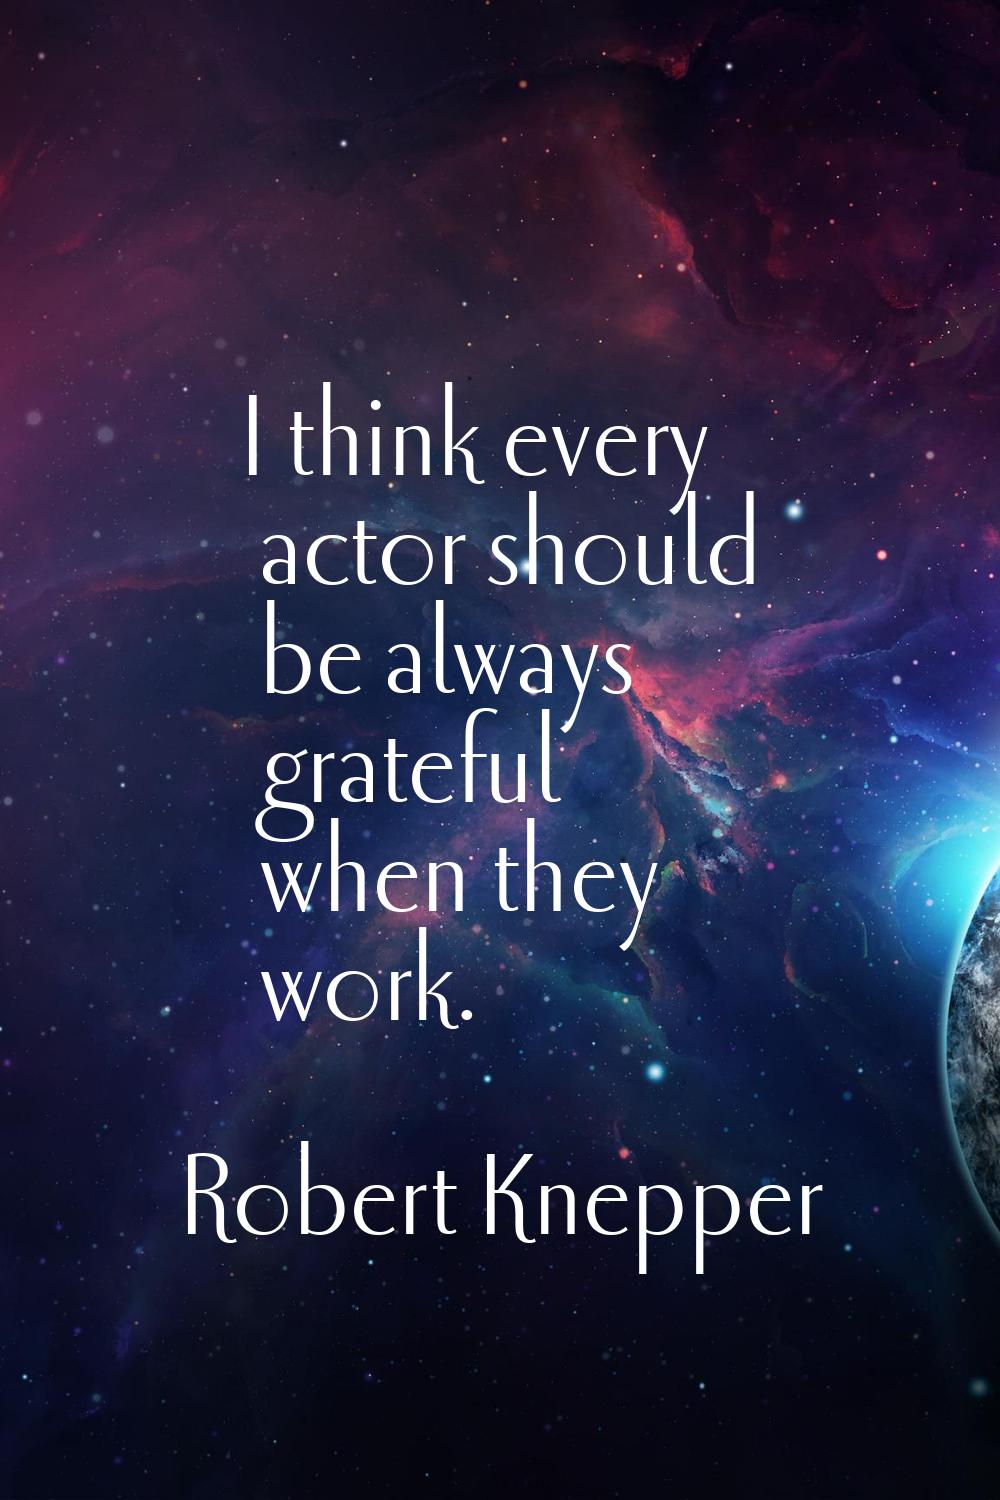 I think every actor should be always grateful when they work.